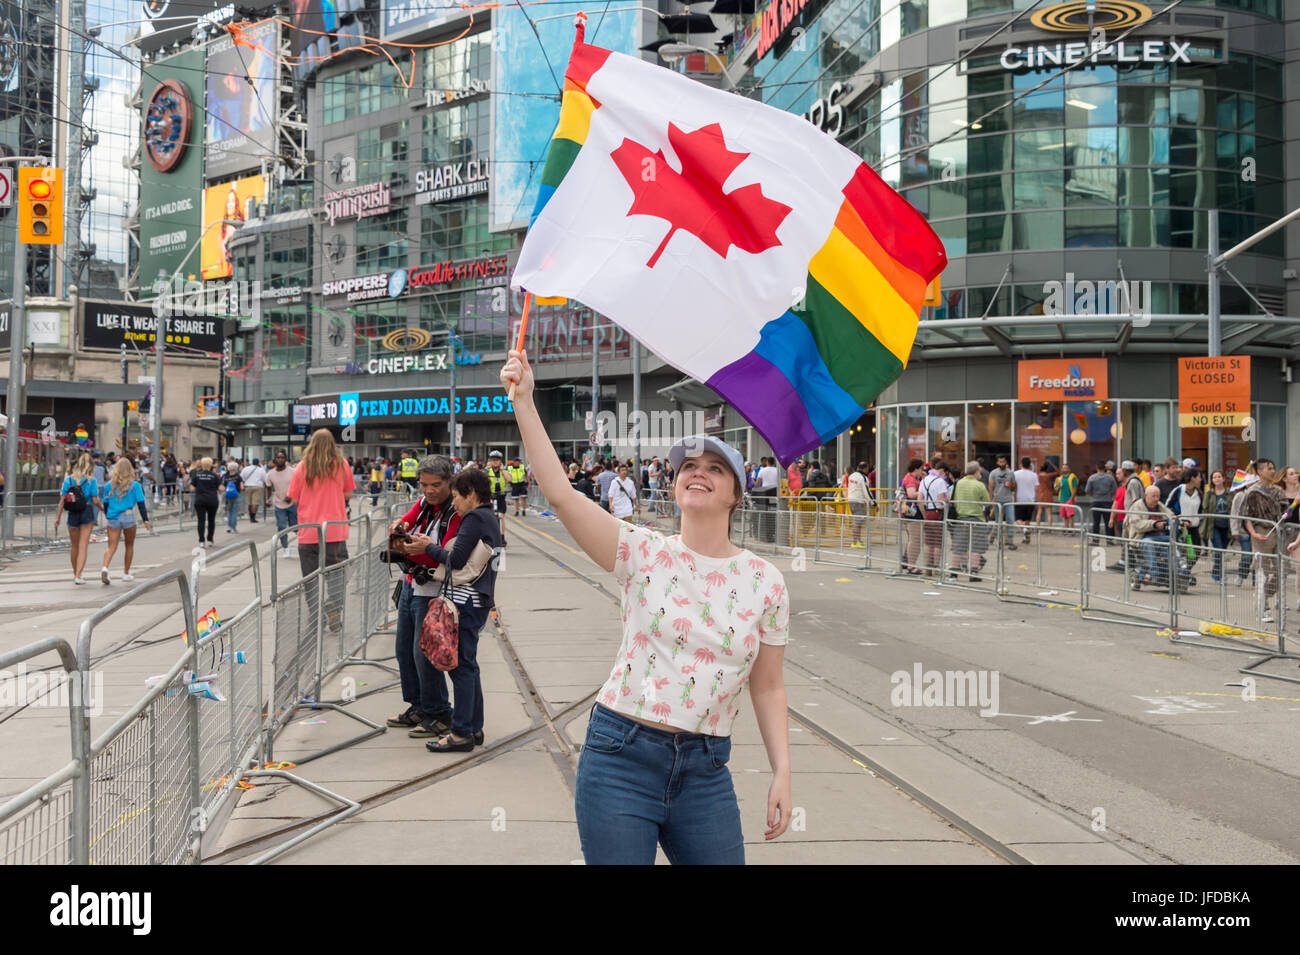 Toronto, Canada - 25 June 2017: Young girl waves canadian gay rainbow flag after Toronto Pride Parade Stock Photo